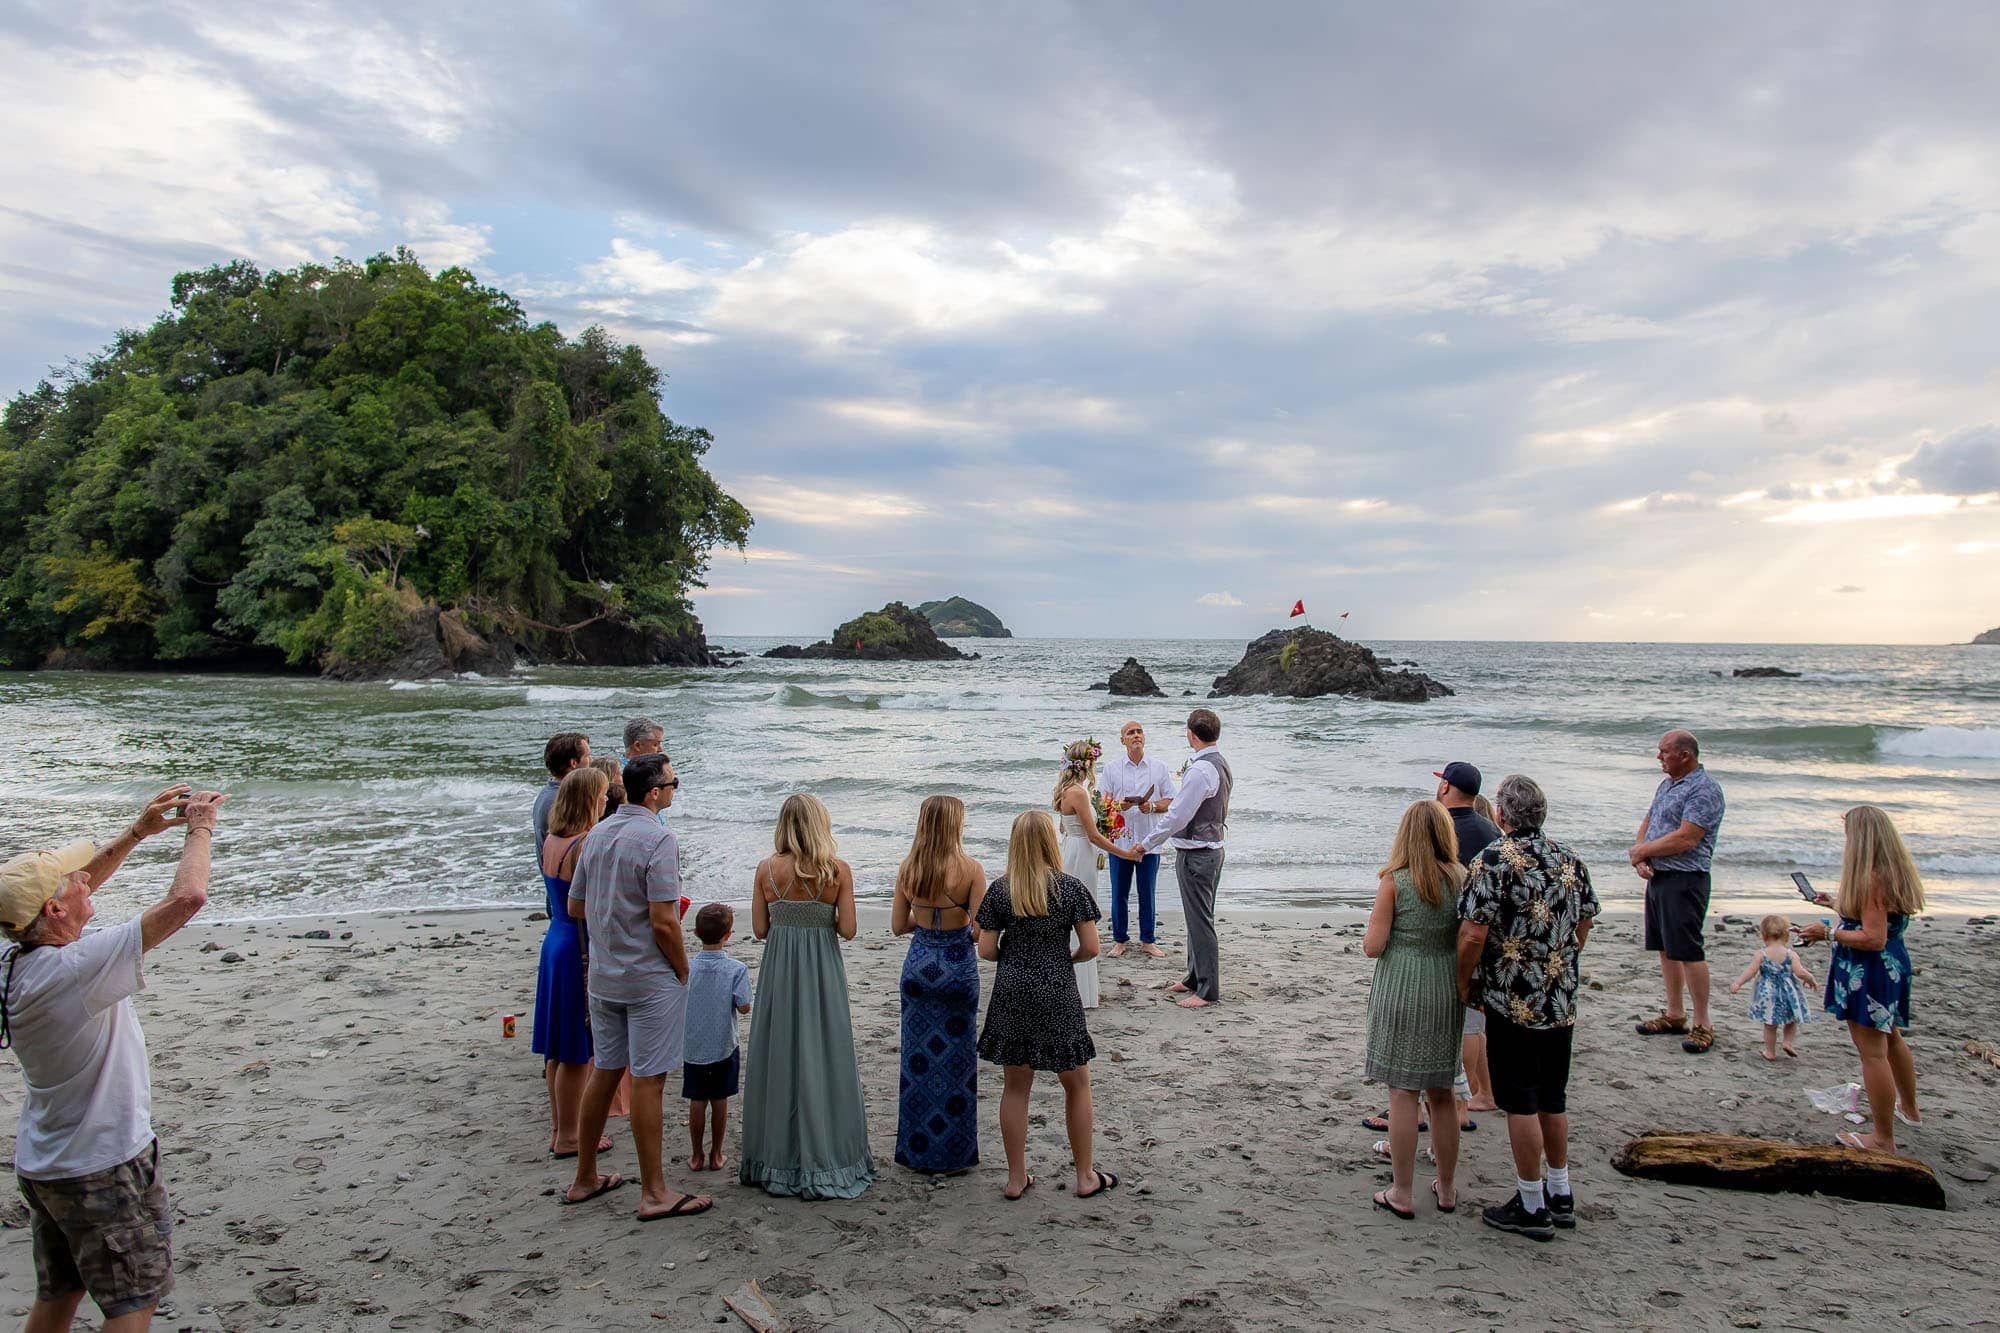 wedding ceremony on beach photographed by second photographer